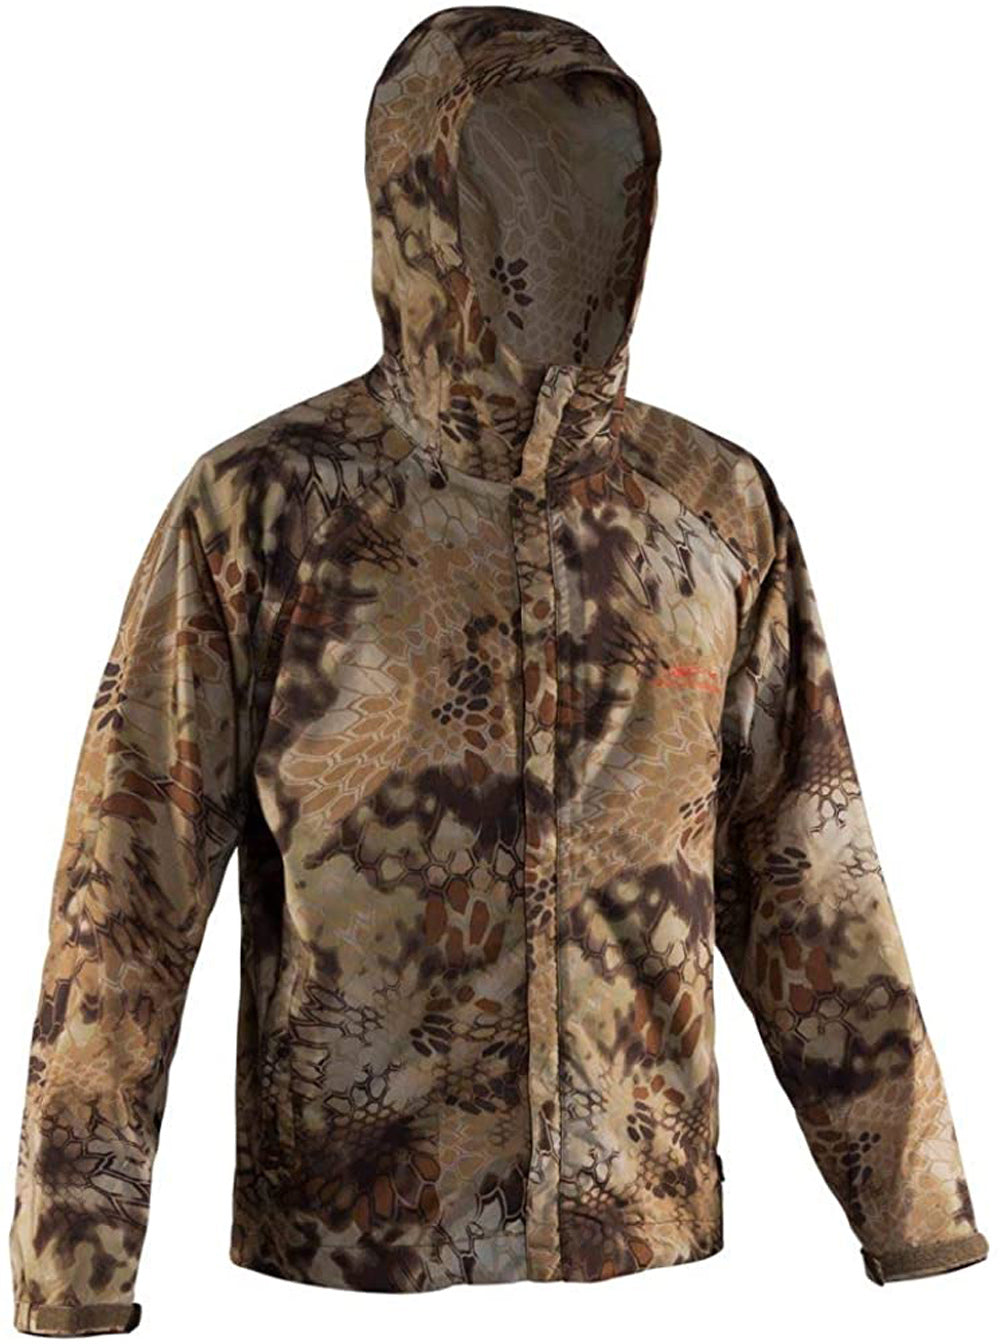 Weather Watch Jacket in Kryptek Highlander color from the front view